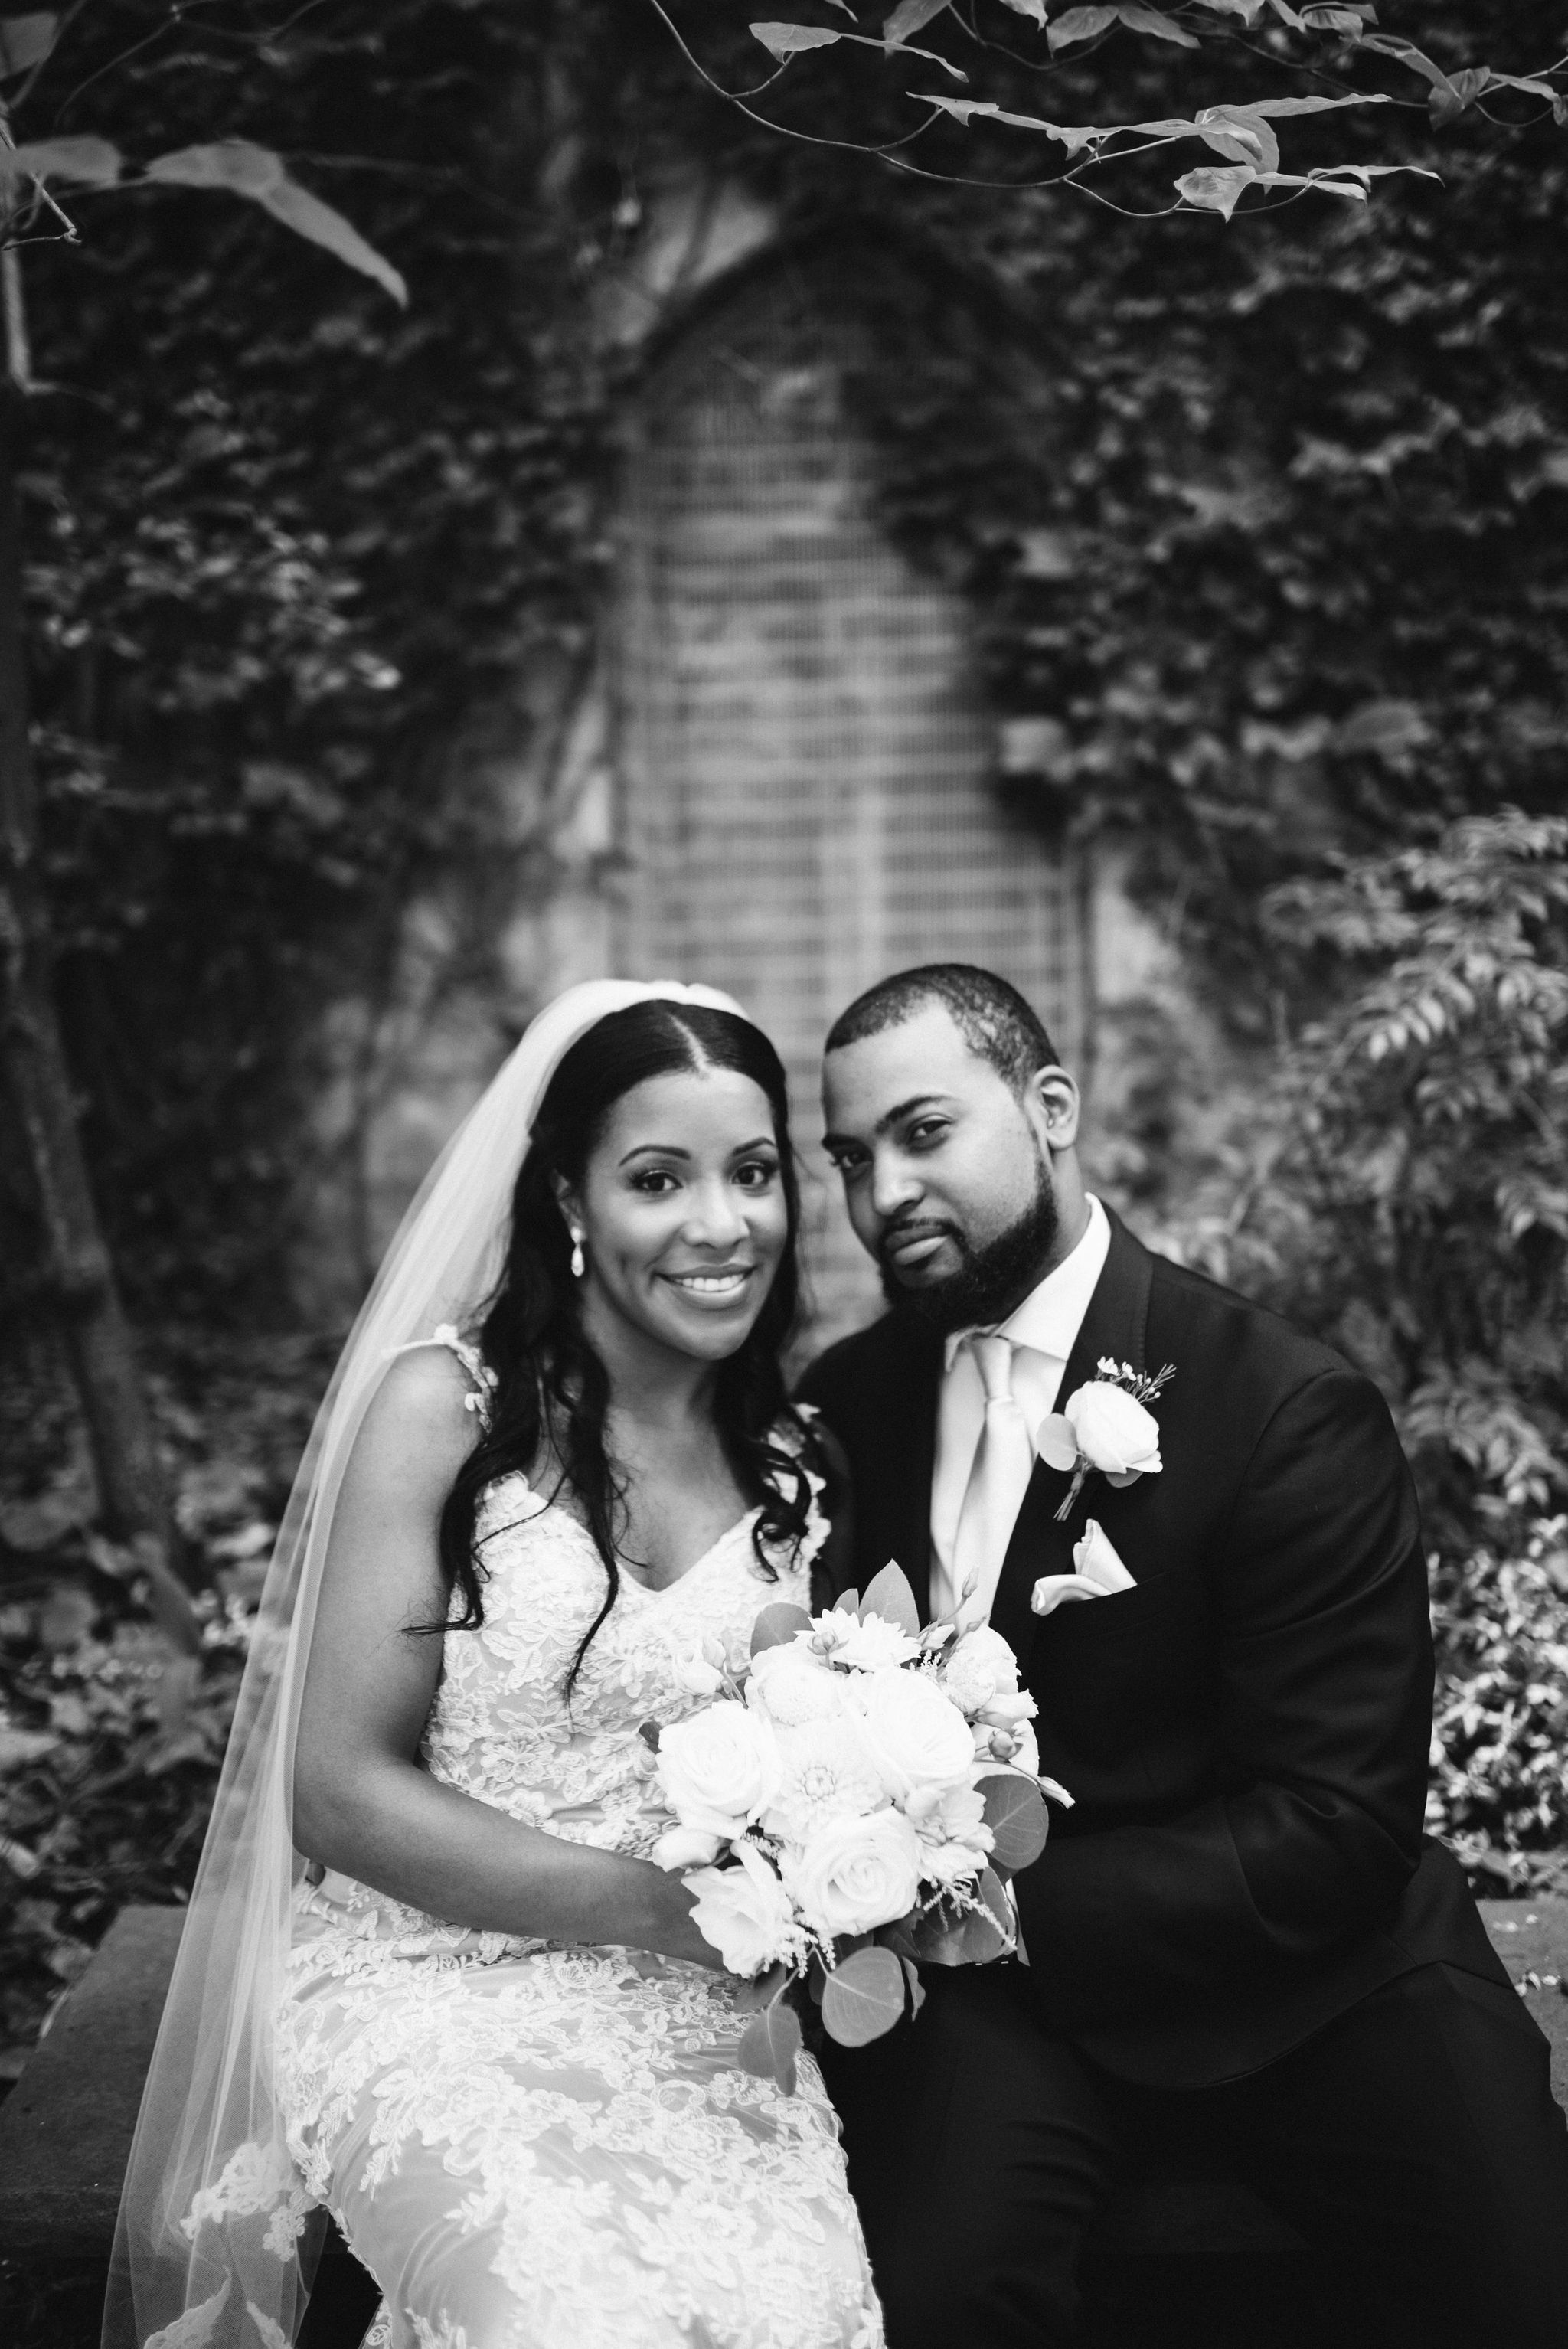  Baltimore, Maryland Wedding Photographer, Mount Vernon, Chase Court, Classic, Outdoor Ceremony, Garden, Romantic, Portrait of Couple Smiling Together, Black and White Photo, Lace Wedding Gown, White Flowers 